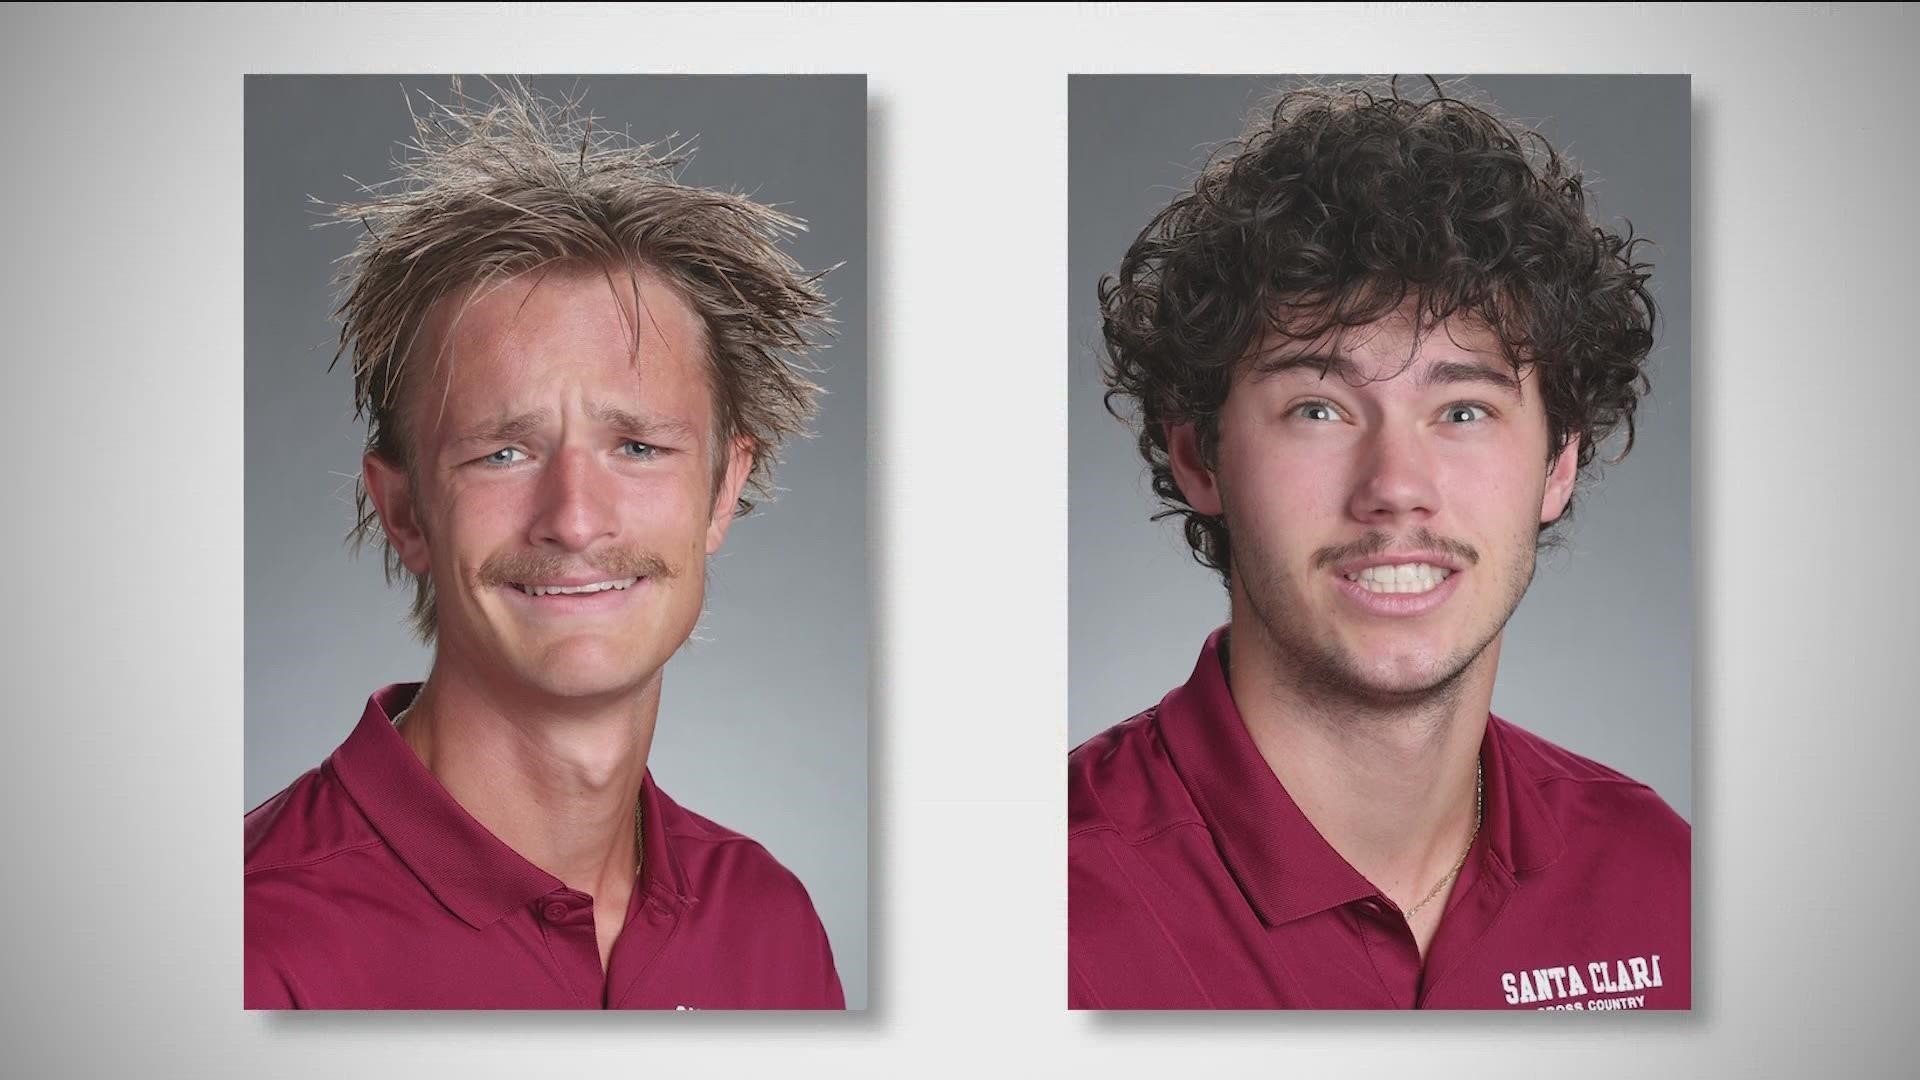 The 2022 Santa Clara University men's cross country team became an instant favorite, thanks to some social media dumps of their hilarious headshots.